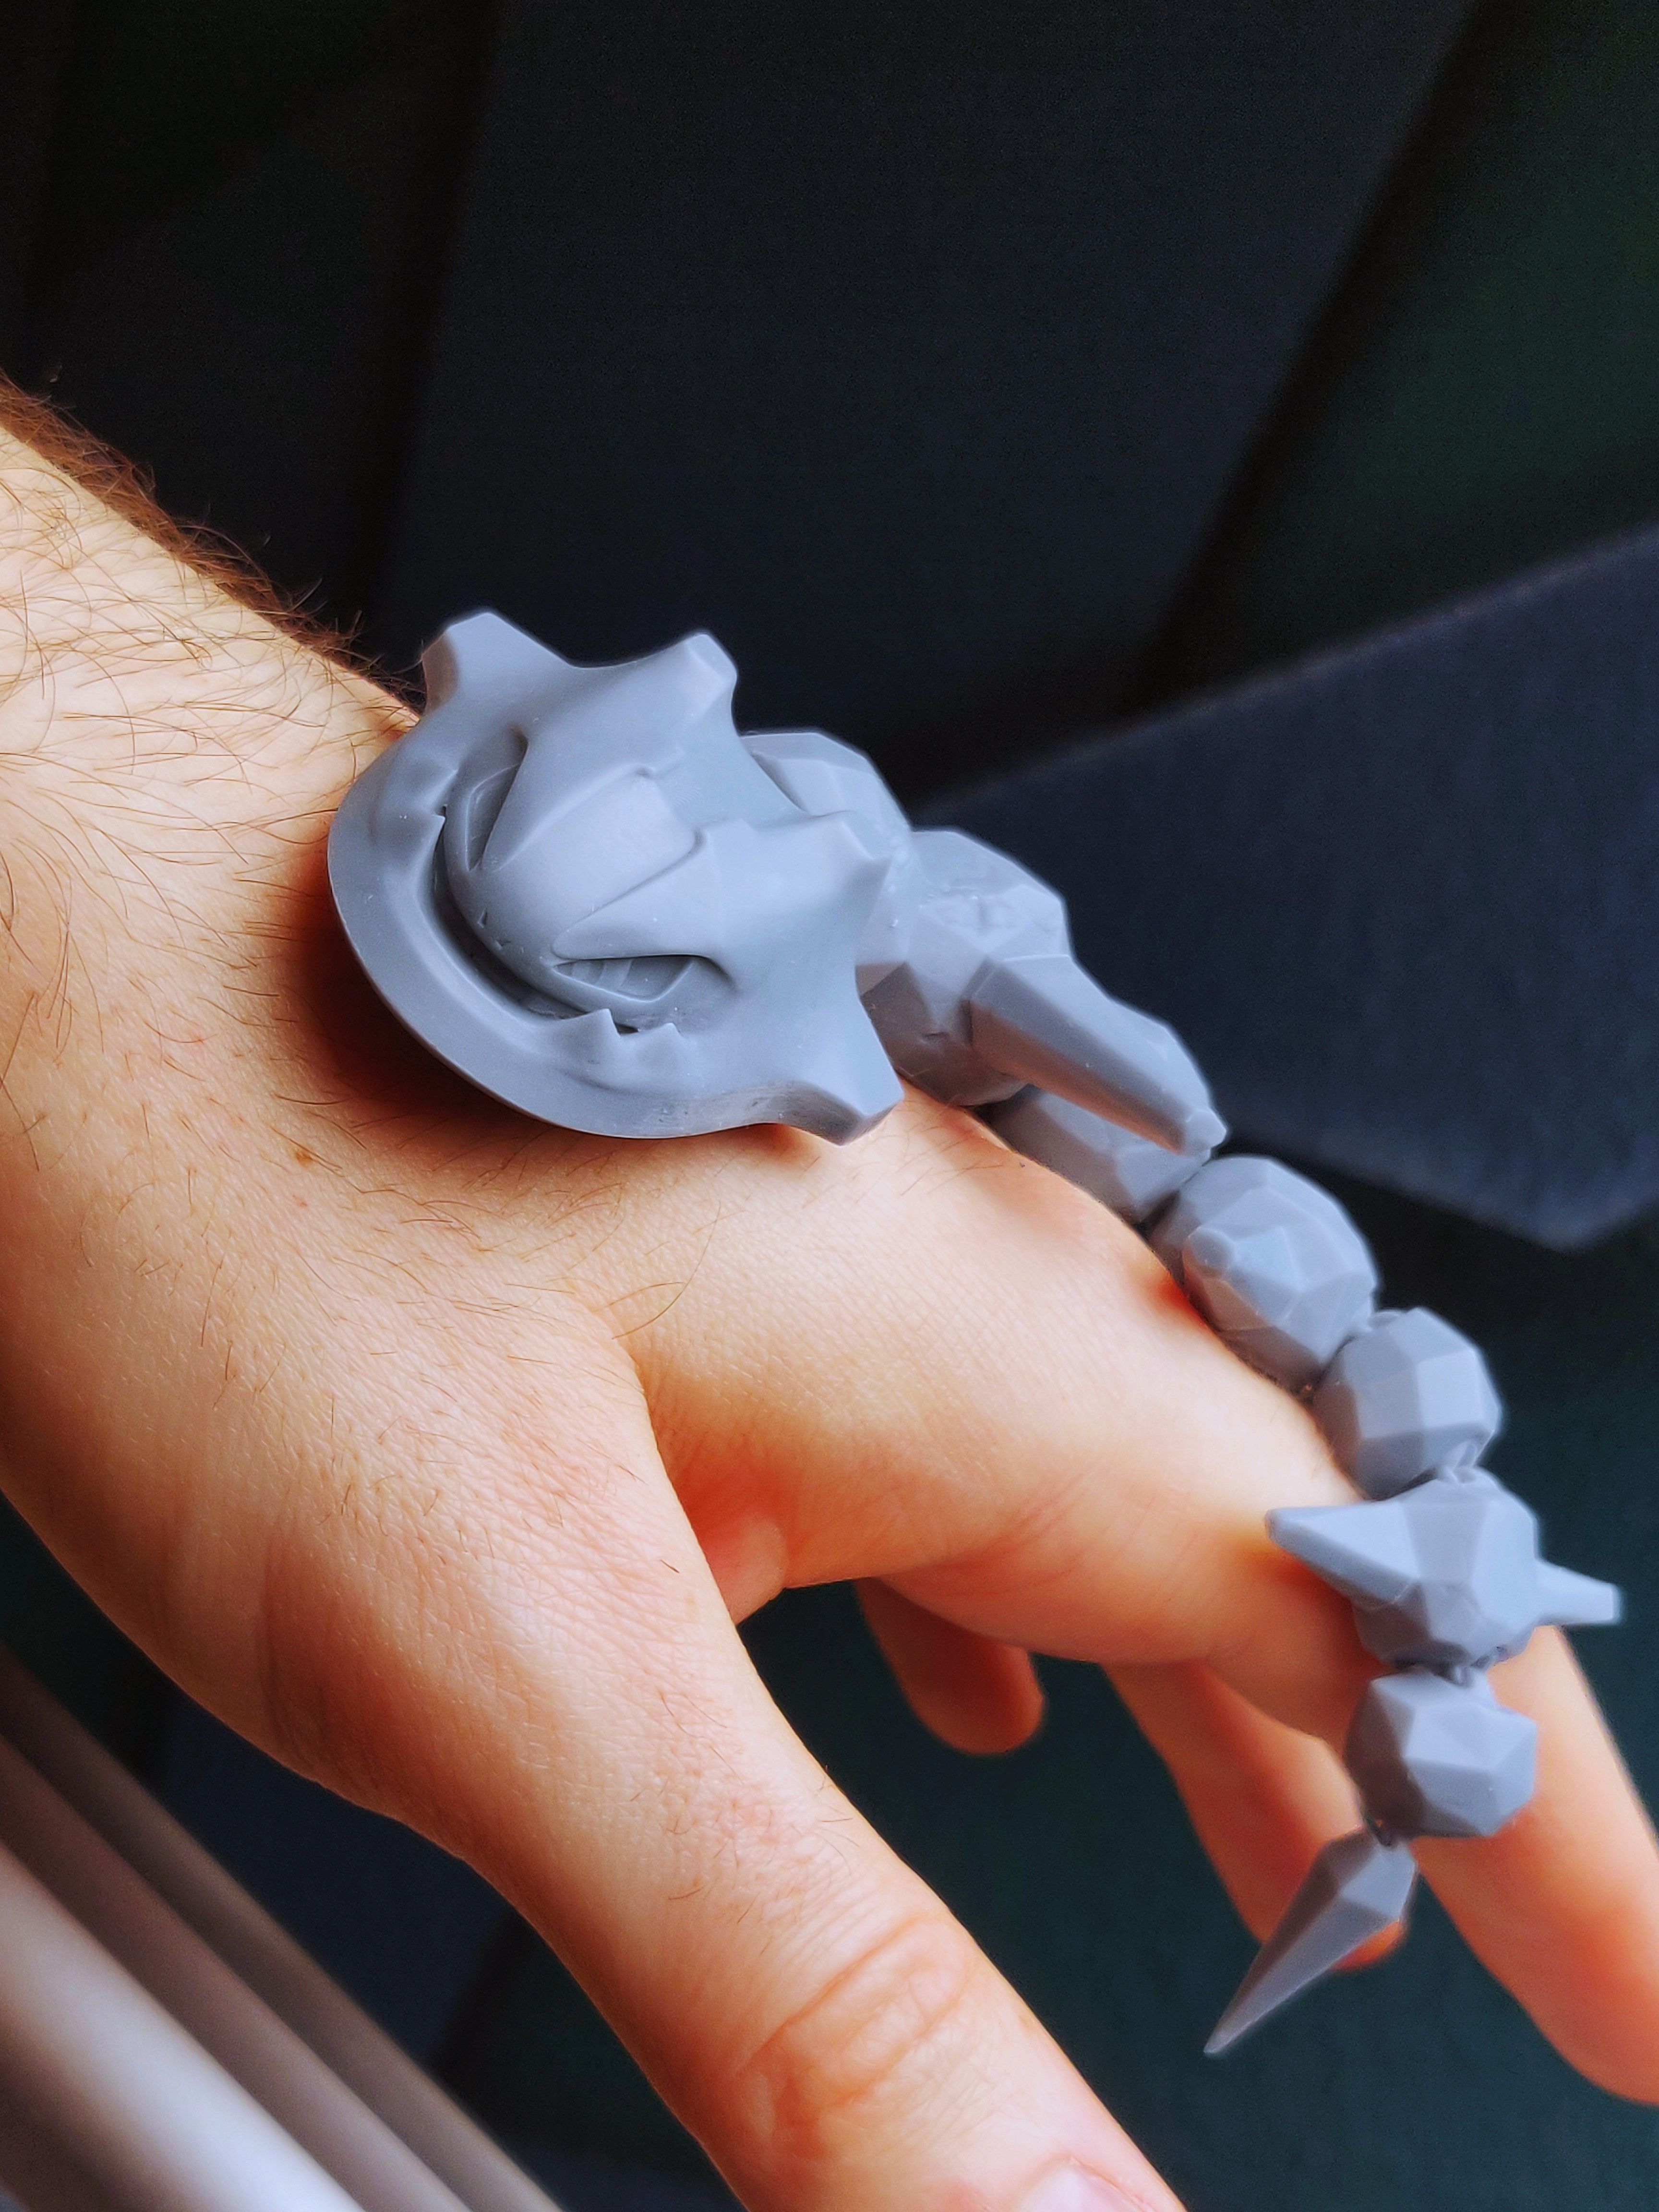 IMG_20220228_194551__01__01.jpg 3D file Articulated Flexi Steelix Pokemon・Design to download and 3D print, Mypokeprints